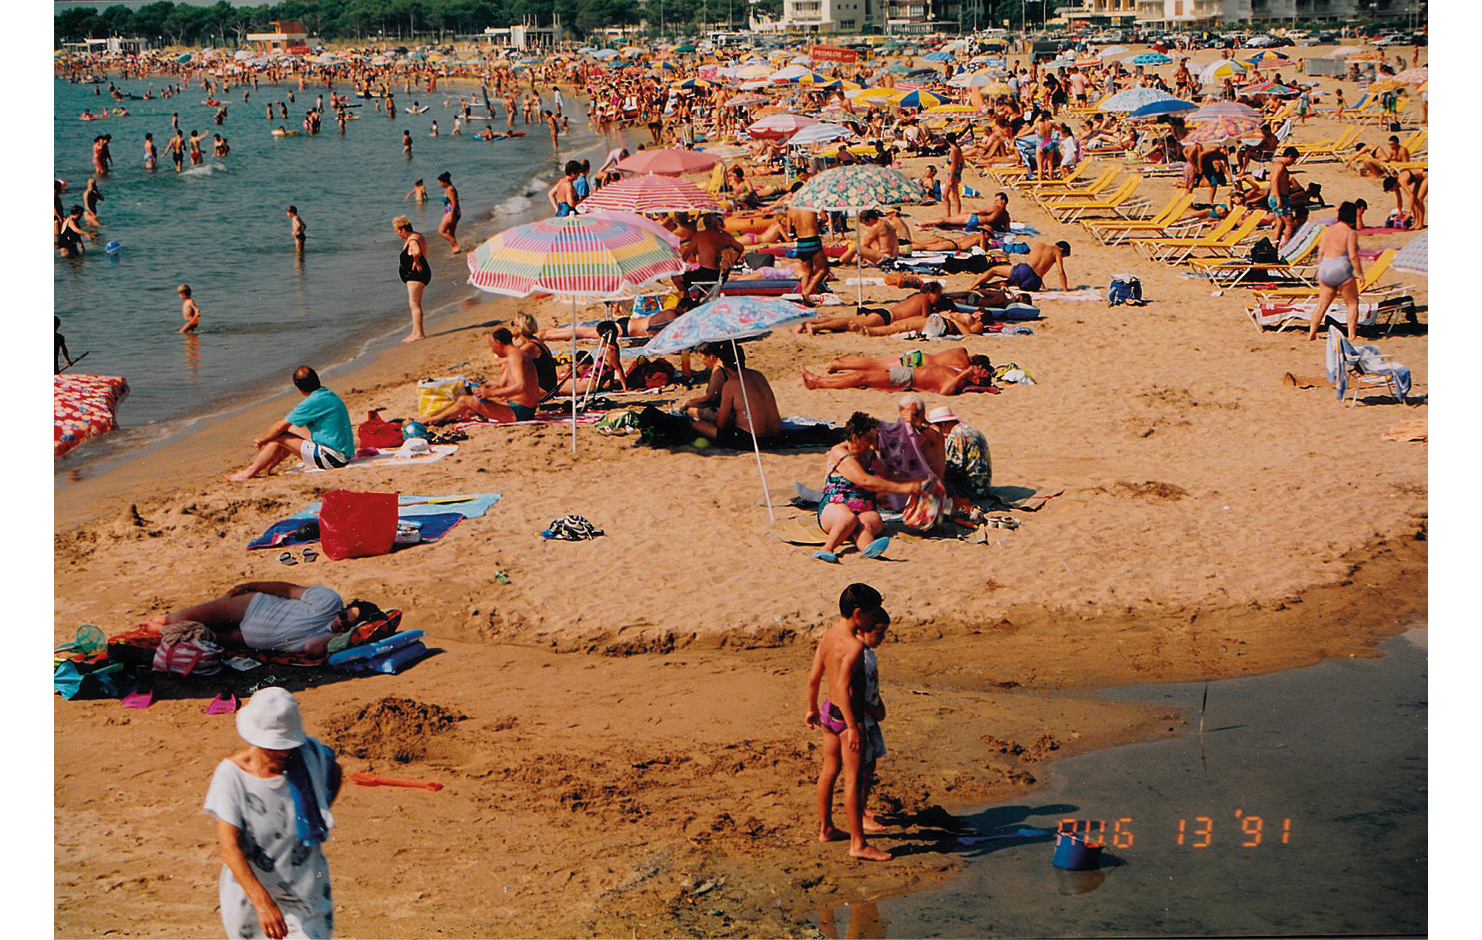 An in-color photograph from 1991 Spain of tourists in Costa Brava: shows a crowd of tourists both in the water and gathered around the coast; in the sand, an array of colorful beach towels, umbrellas, and chairs